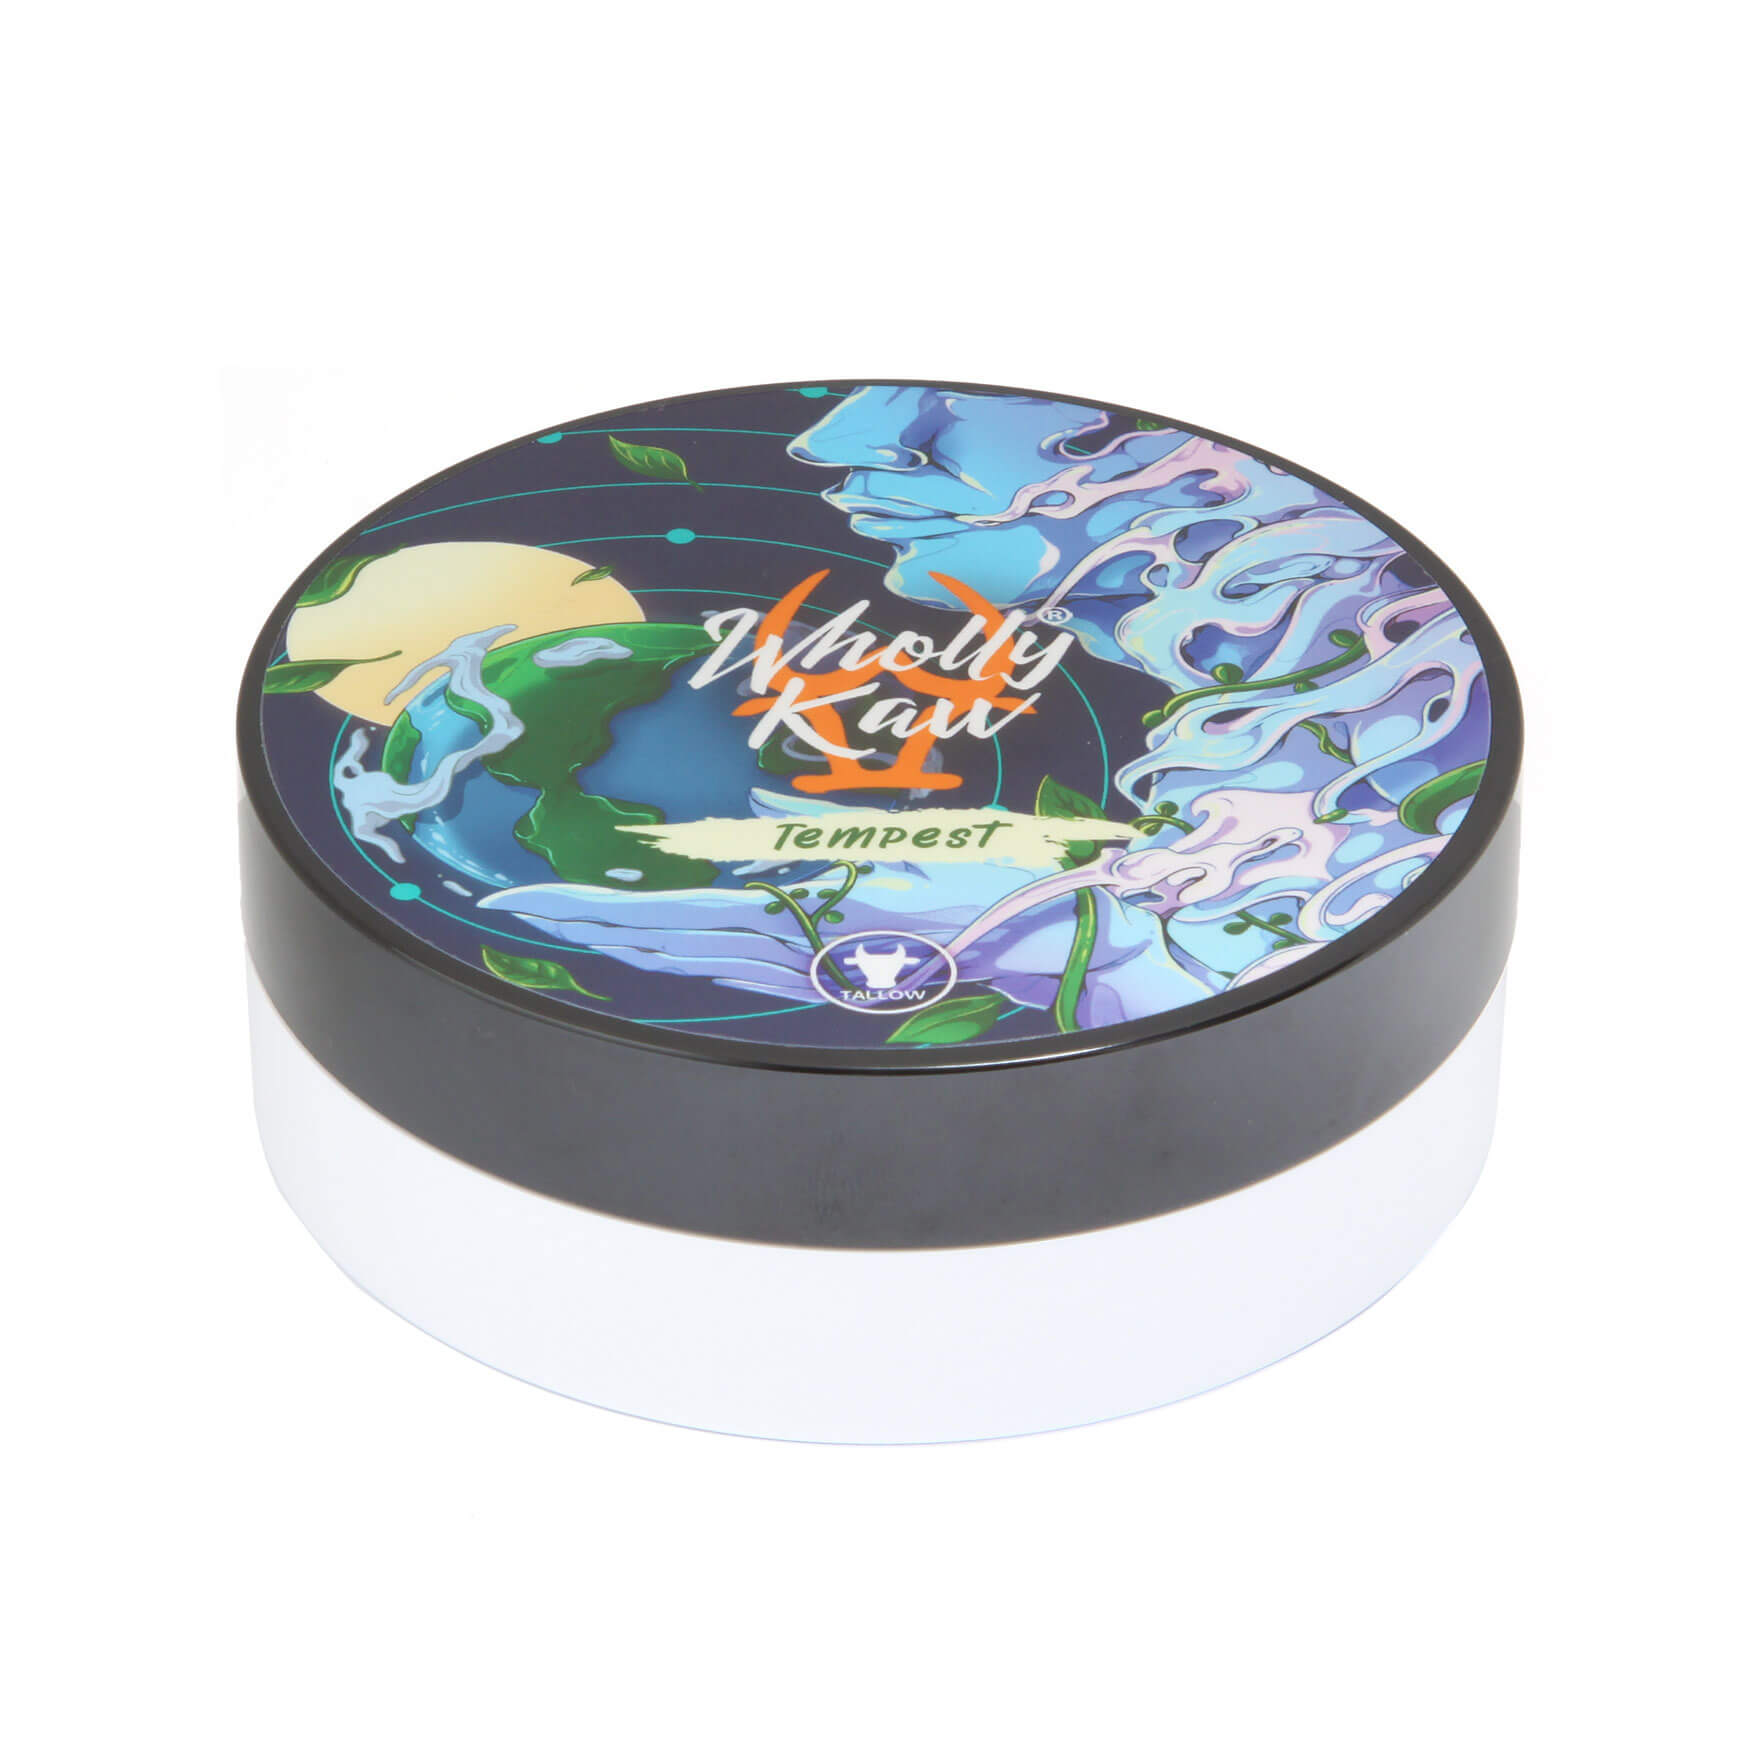 Wholly Kaw Tempest Shaving Soap